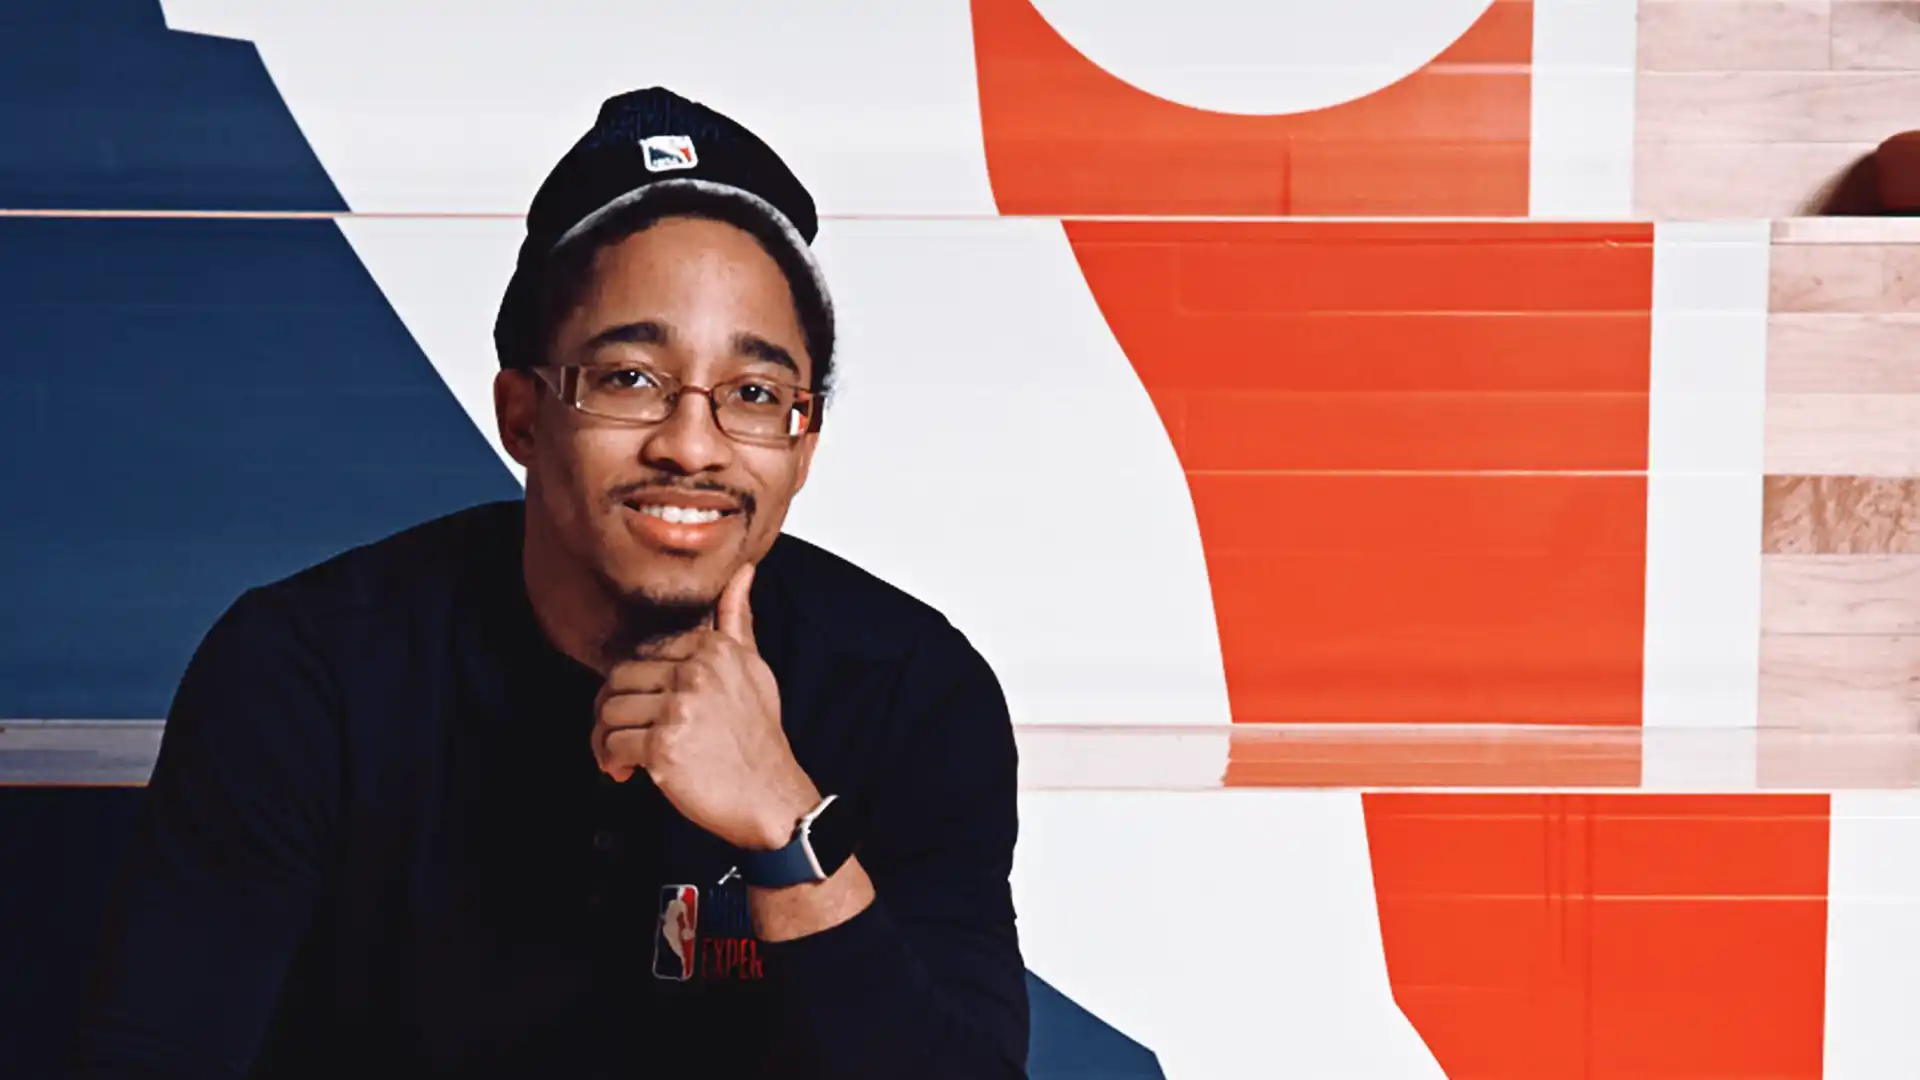 Smiling man in a black shirt, seated in front of an NBA logo backdrop.